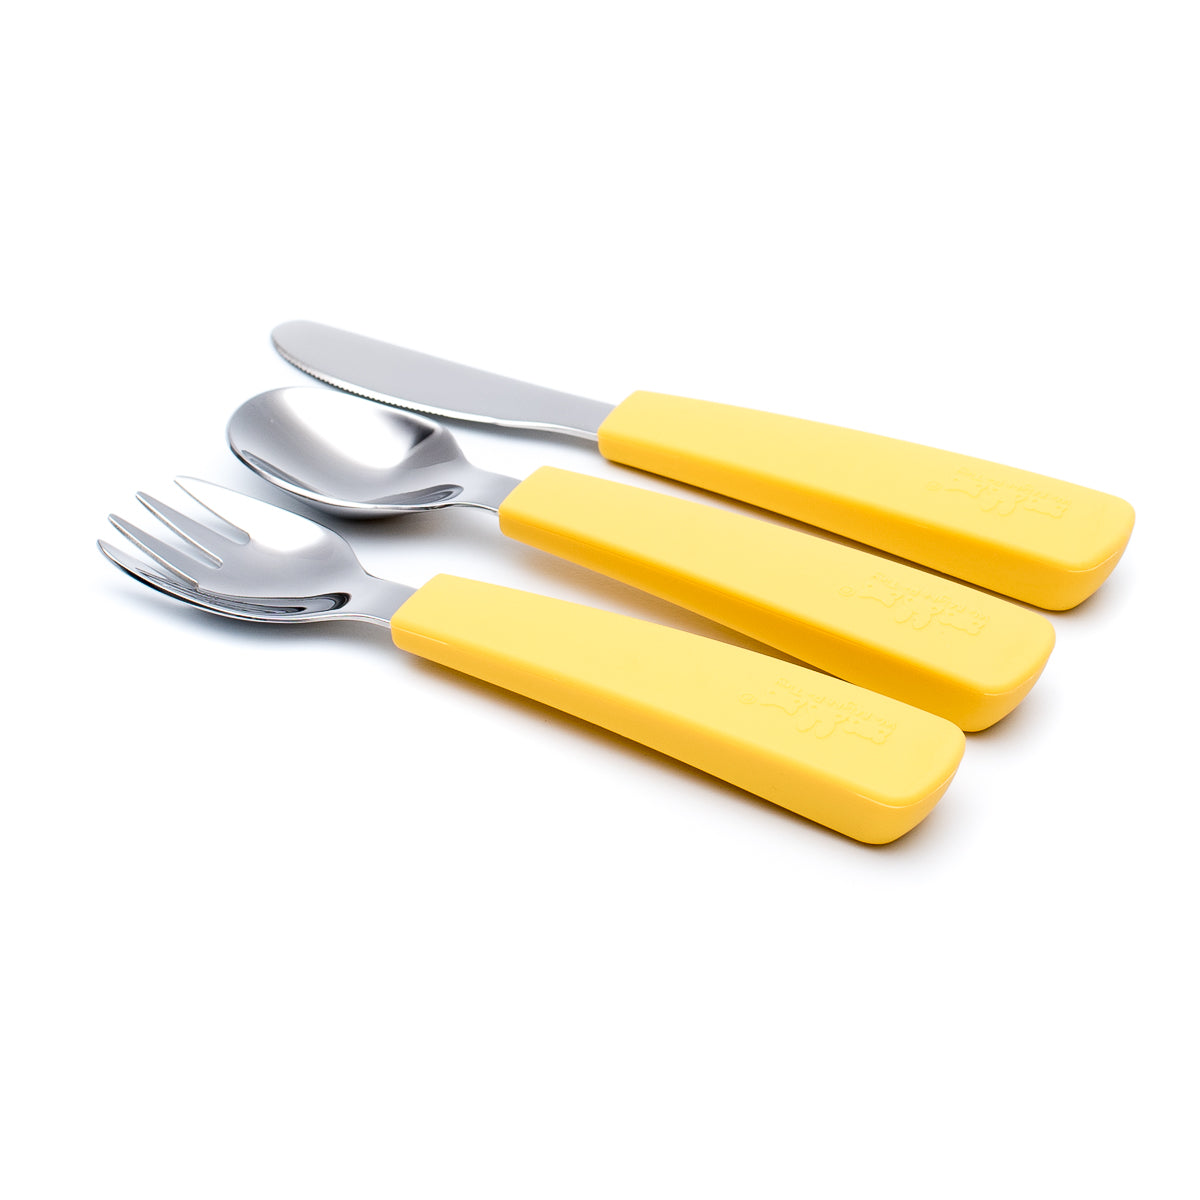 We Might Be Tiny Toddler Feedie Cutlery Set